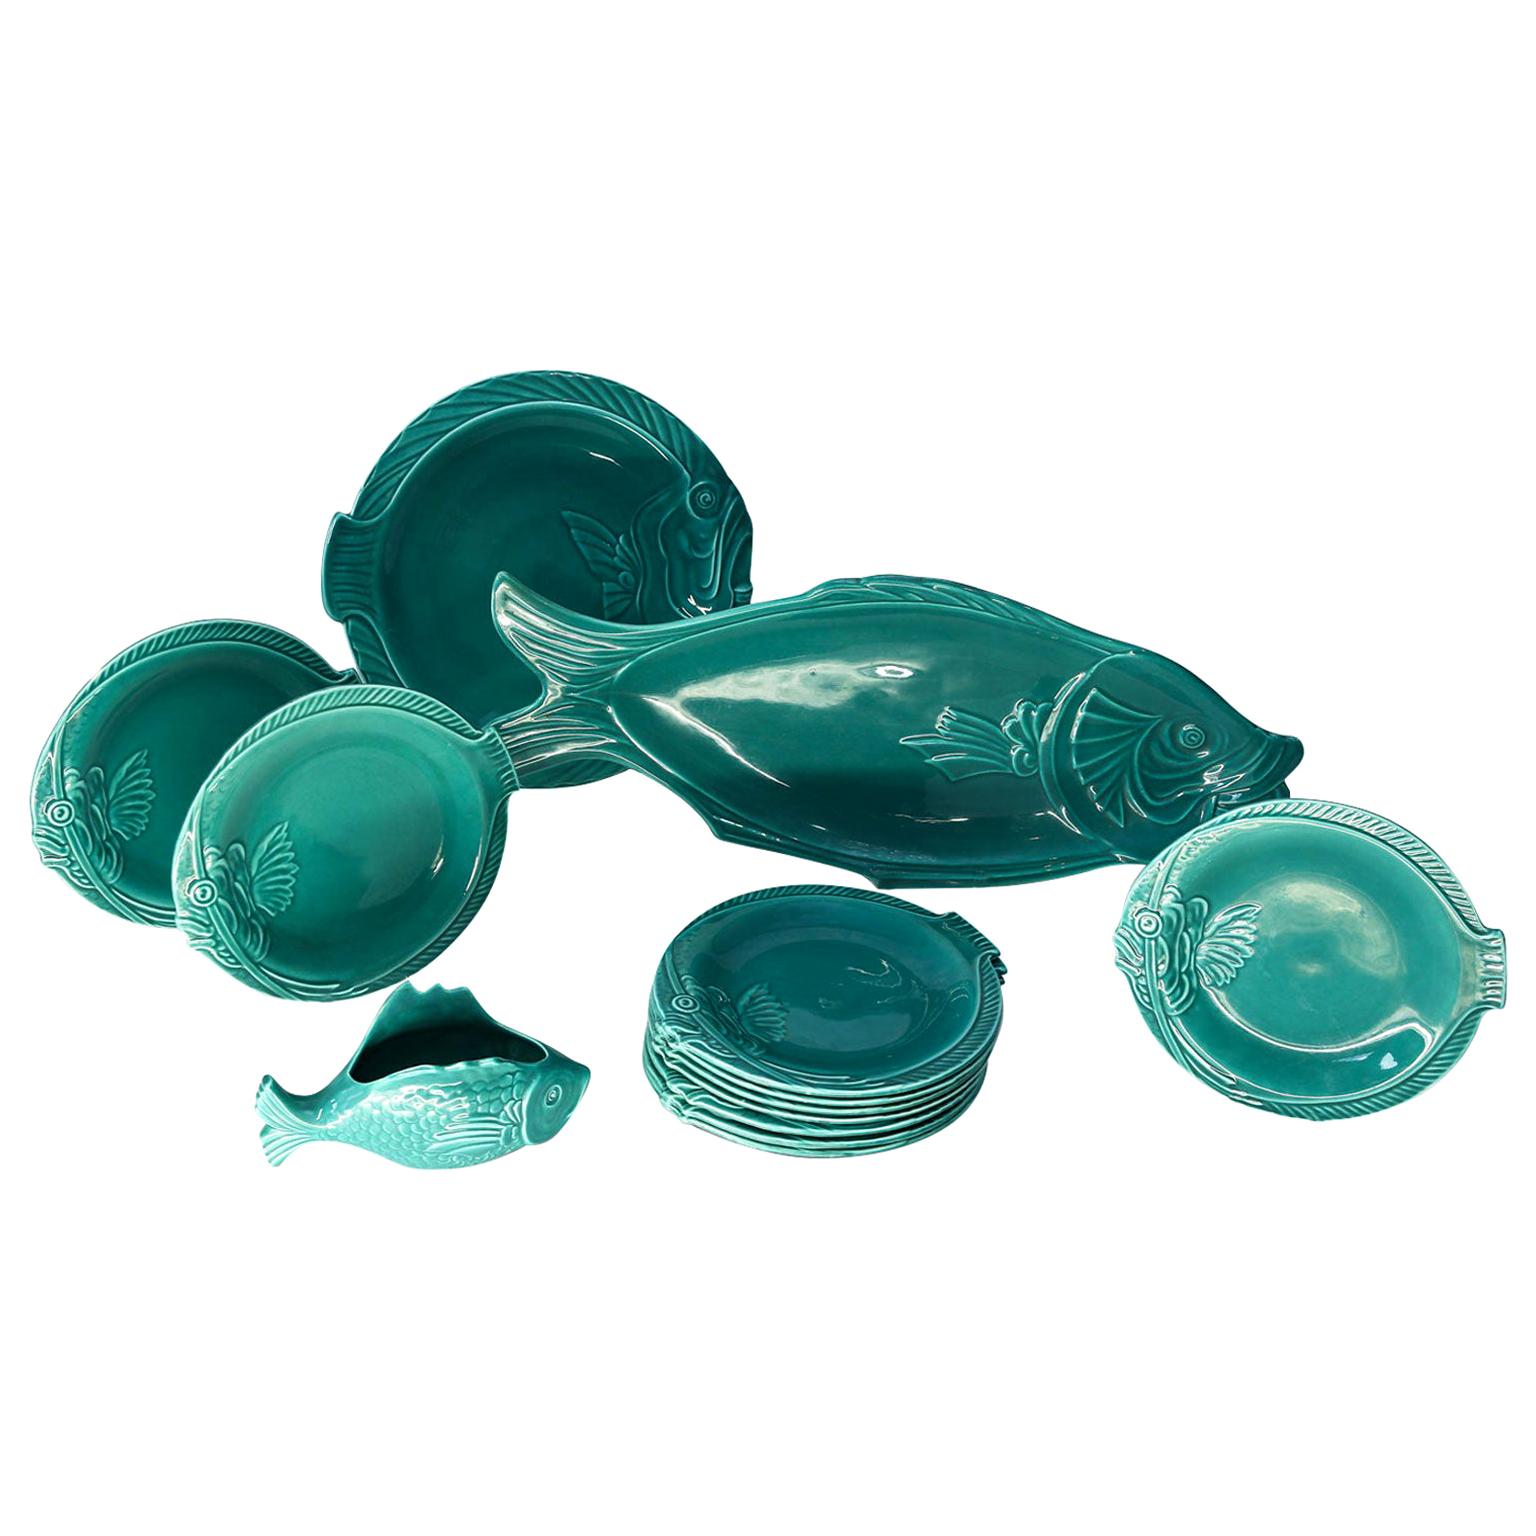 Set of Teal Fish-Shape Ceramic Dishes For Sale